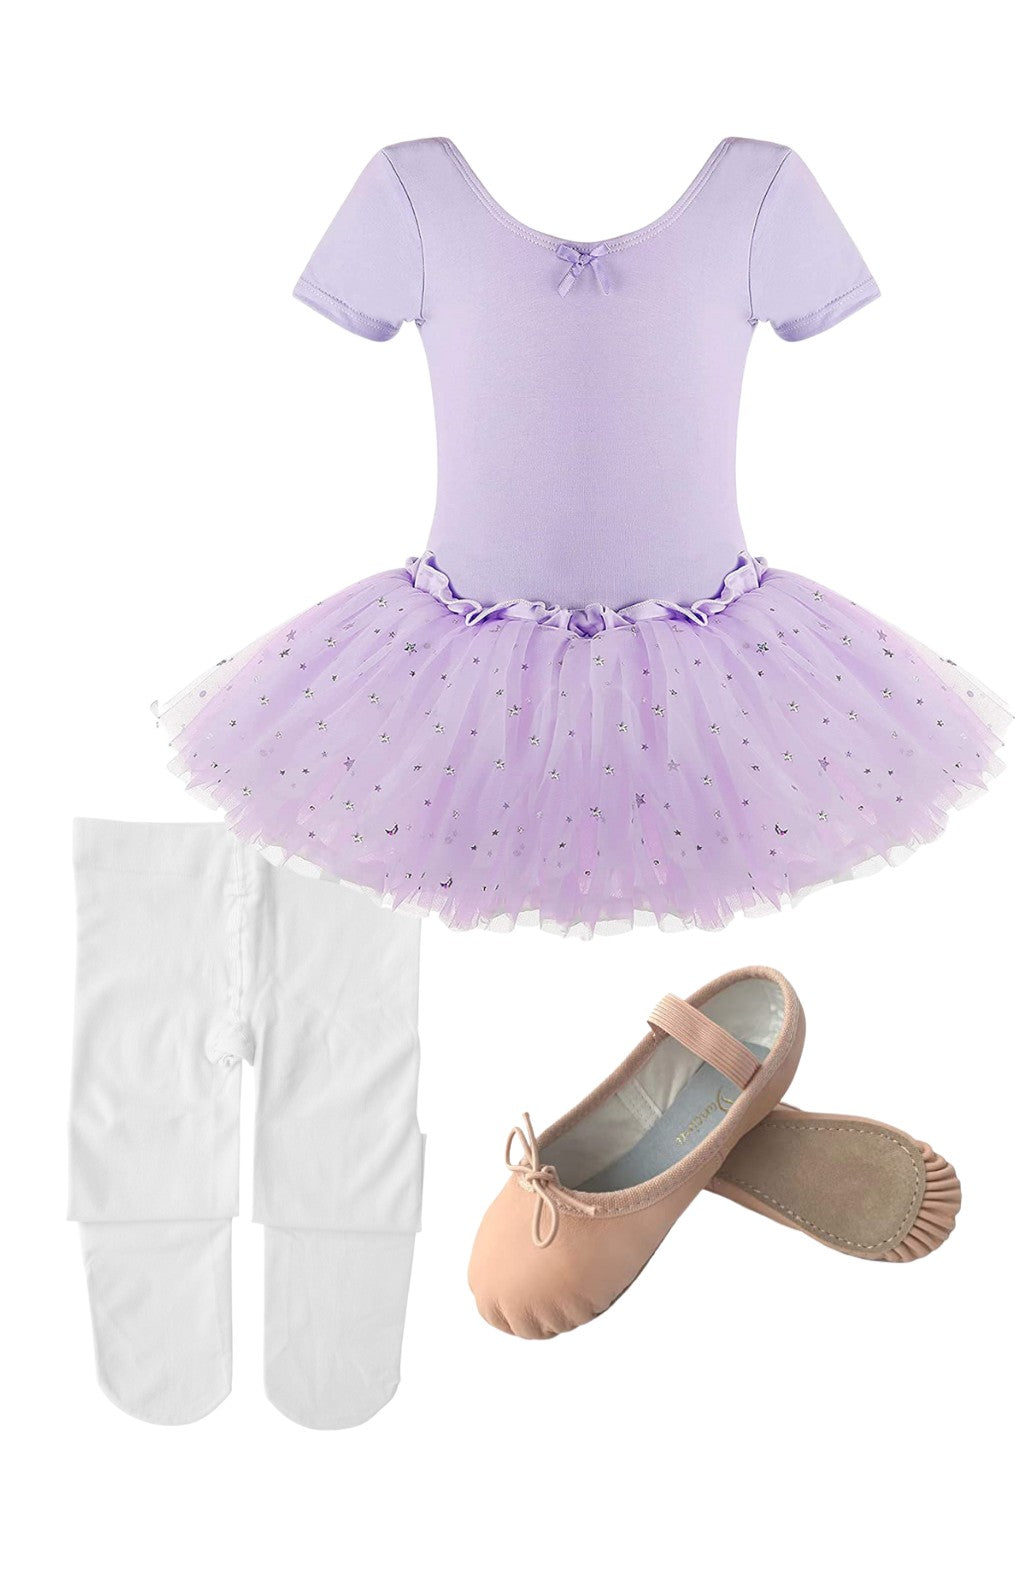 Ballerina Outfit Set Tutu + Tights + Shoes